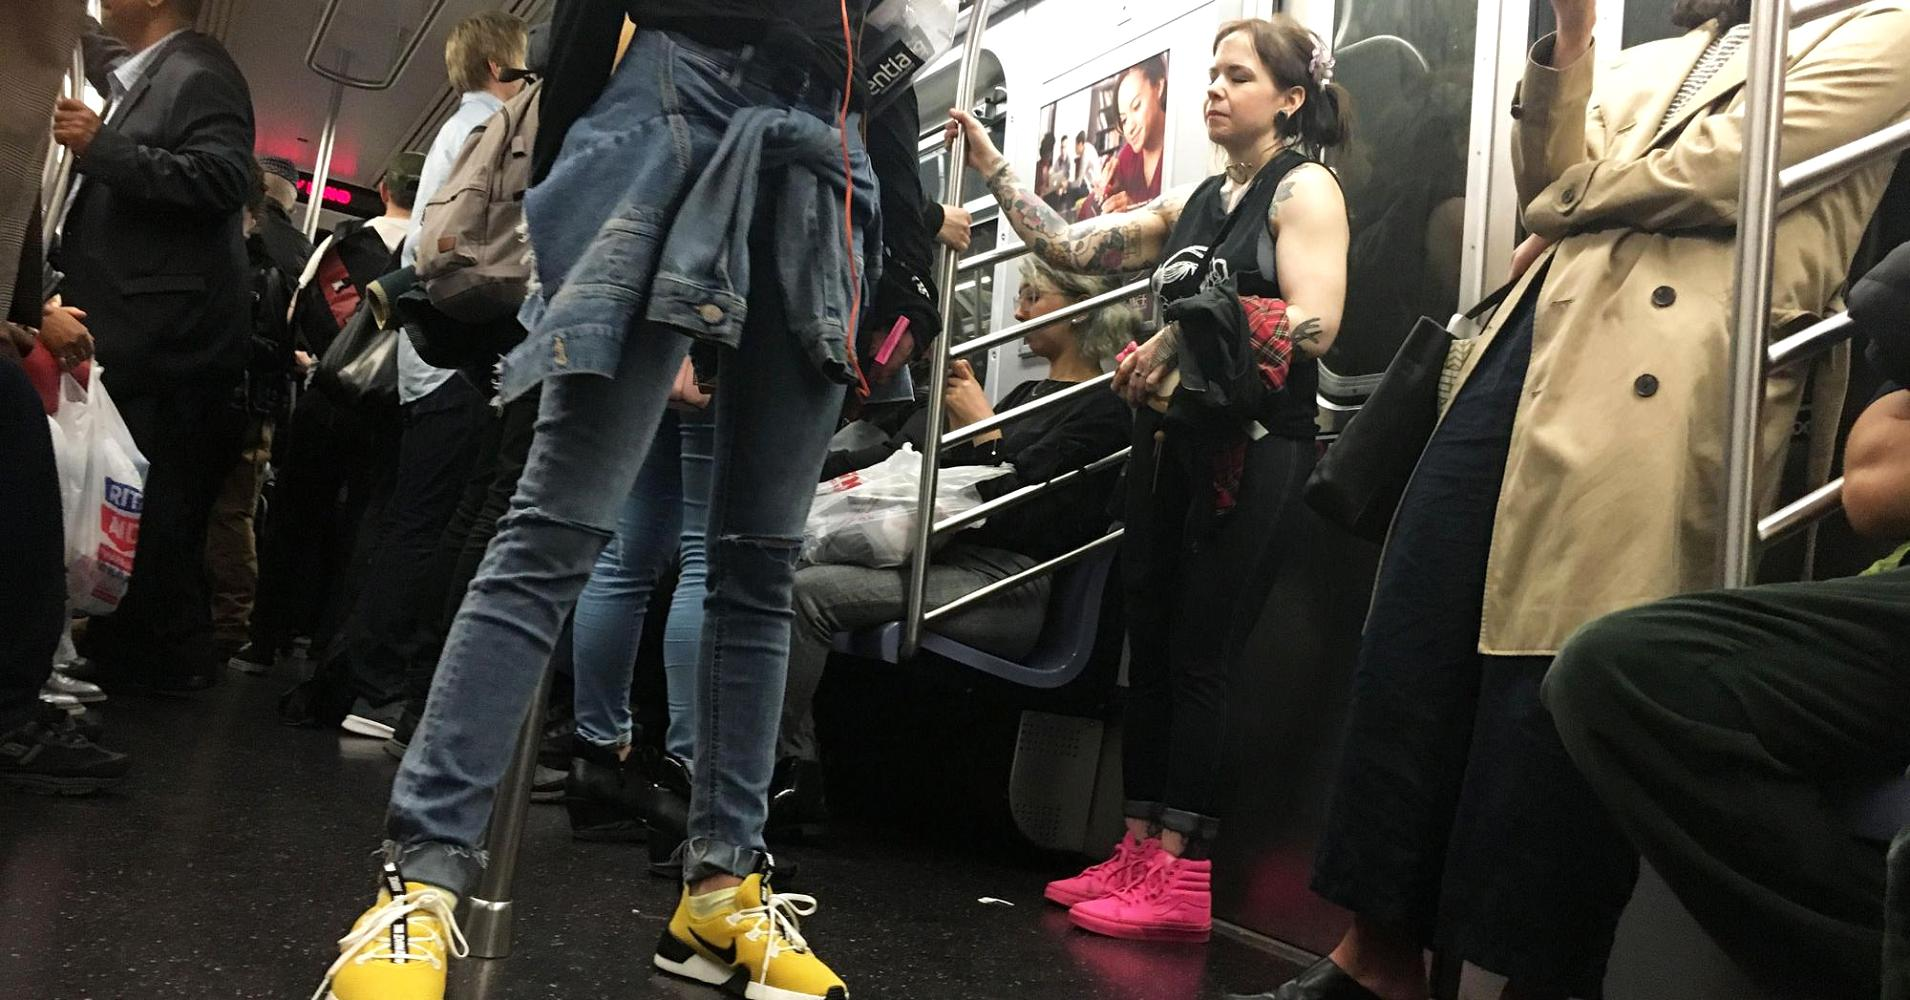 Even in large metropolitan areas, women are choosing comfortable footwear. Women ride the subway in New York City wearing a variety of sneakers and flats. Photo: Kellie Ell/CNBC